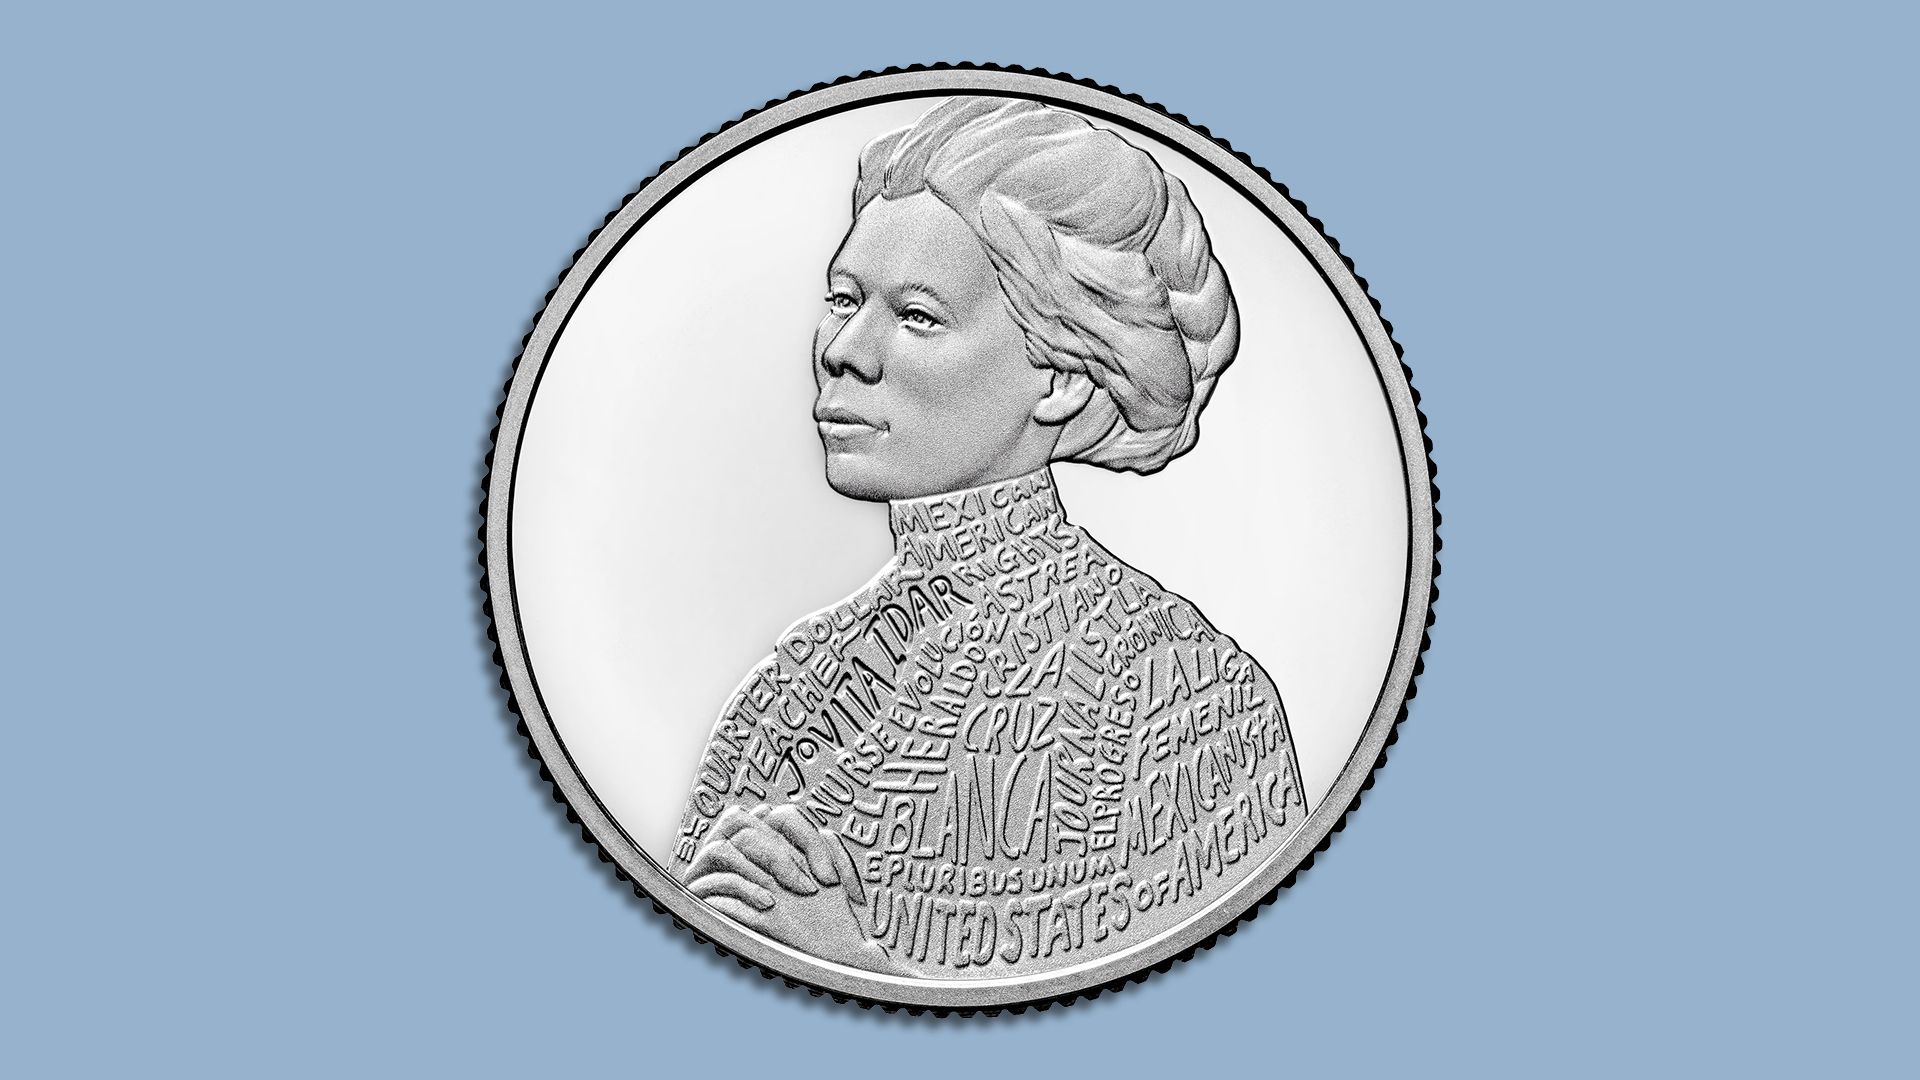 A medallic image of Jovita Idar on a coin, on a light blue background.